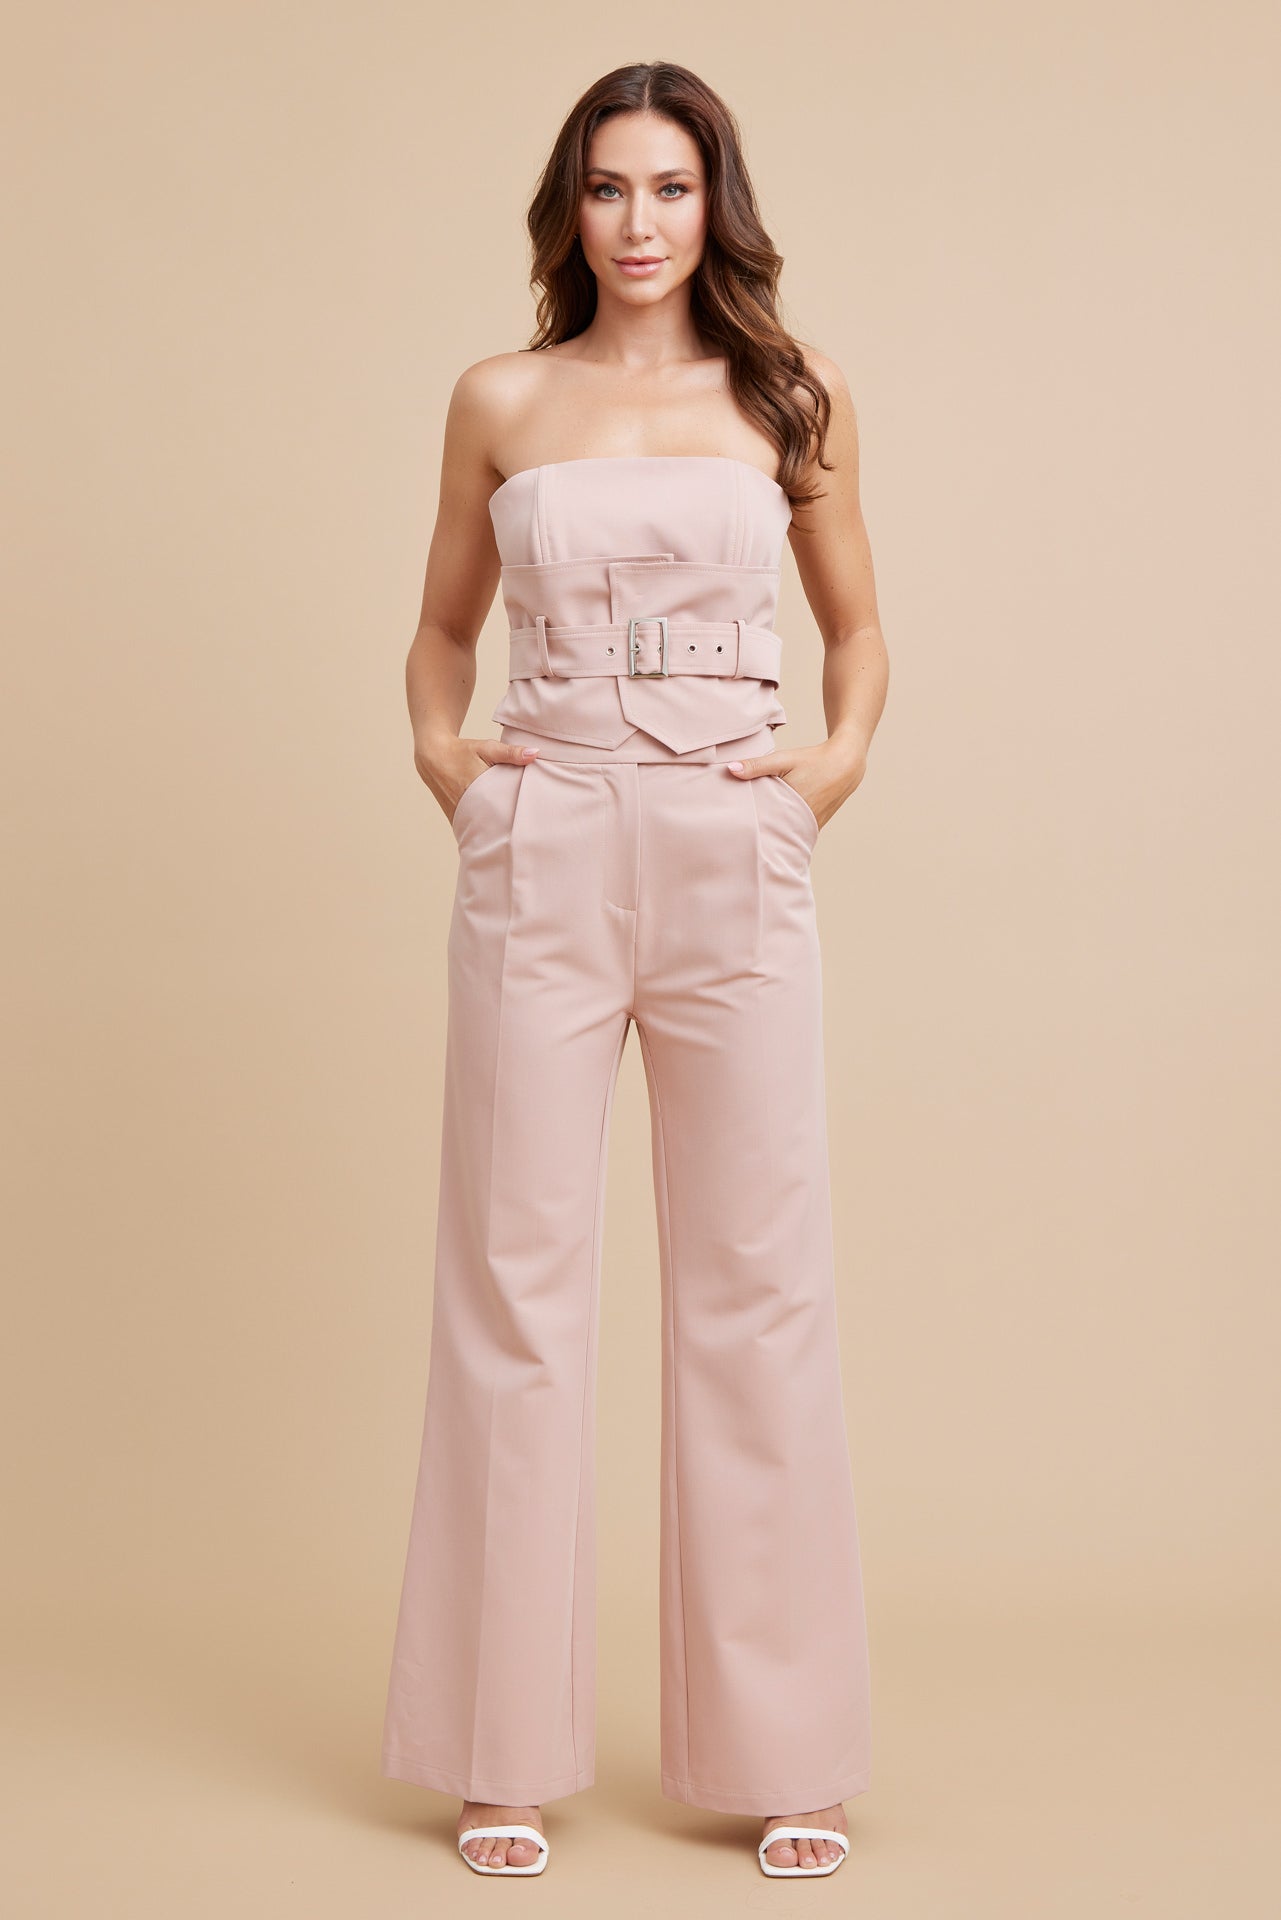 Woven Bustier Tube Top and Pants Set